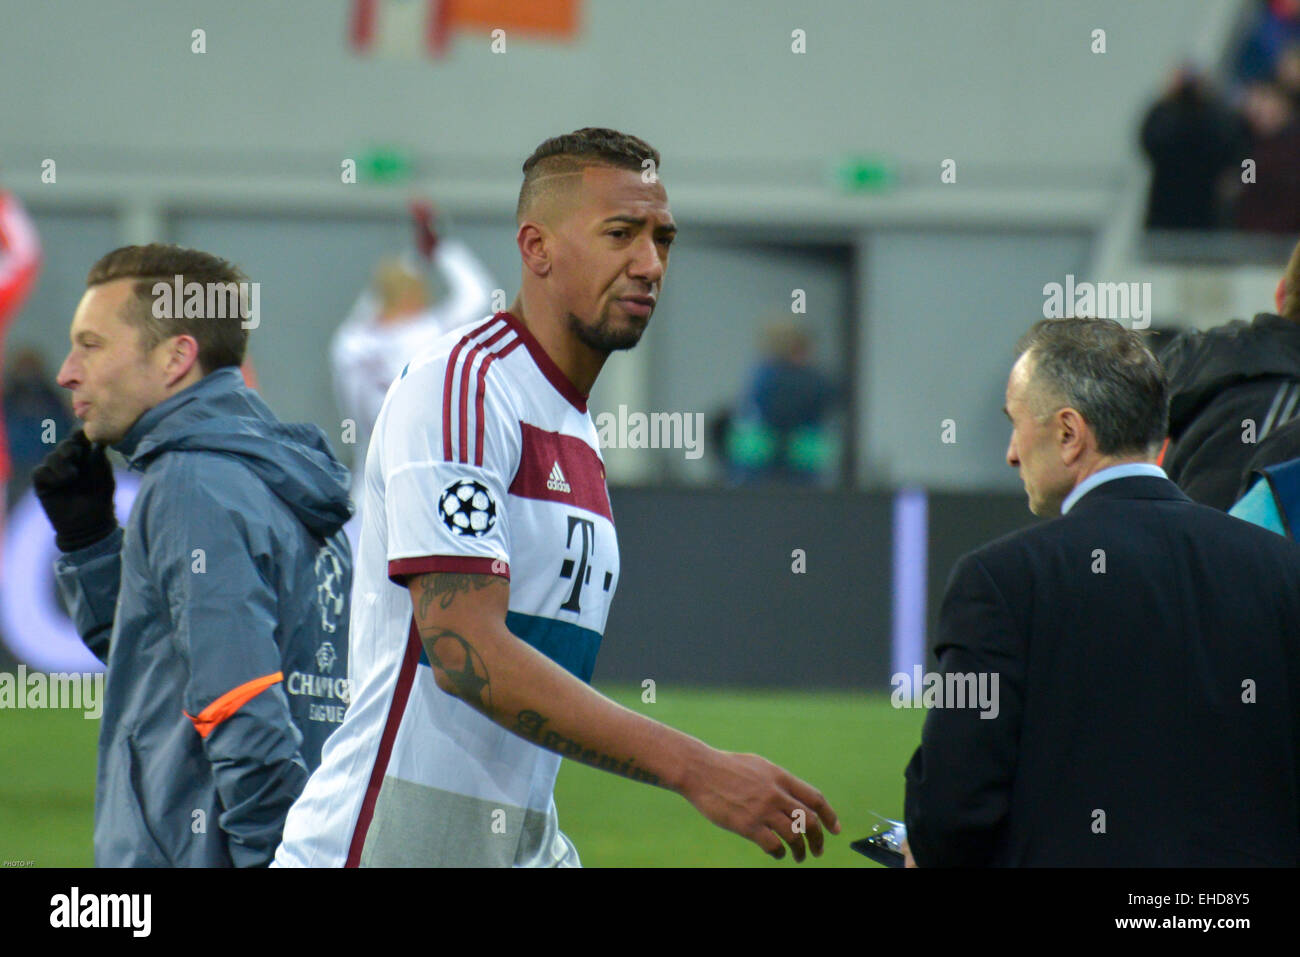 Jérôme Boateng during the match between FC Shakhtar Donetsk vs FC Bayern München. UEFA Champions League. Stock Photo